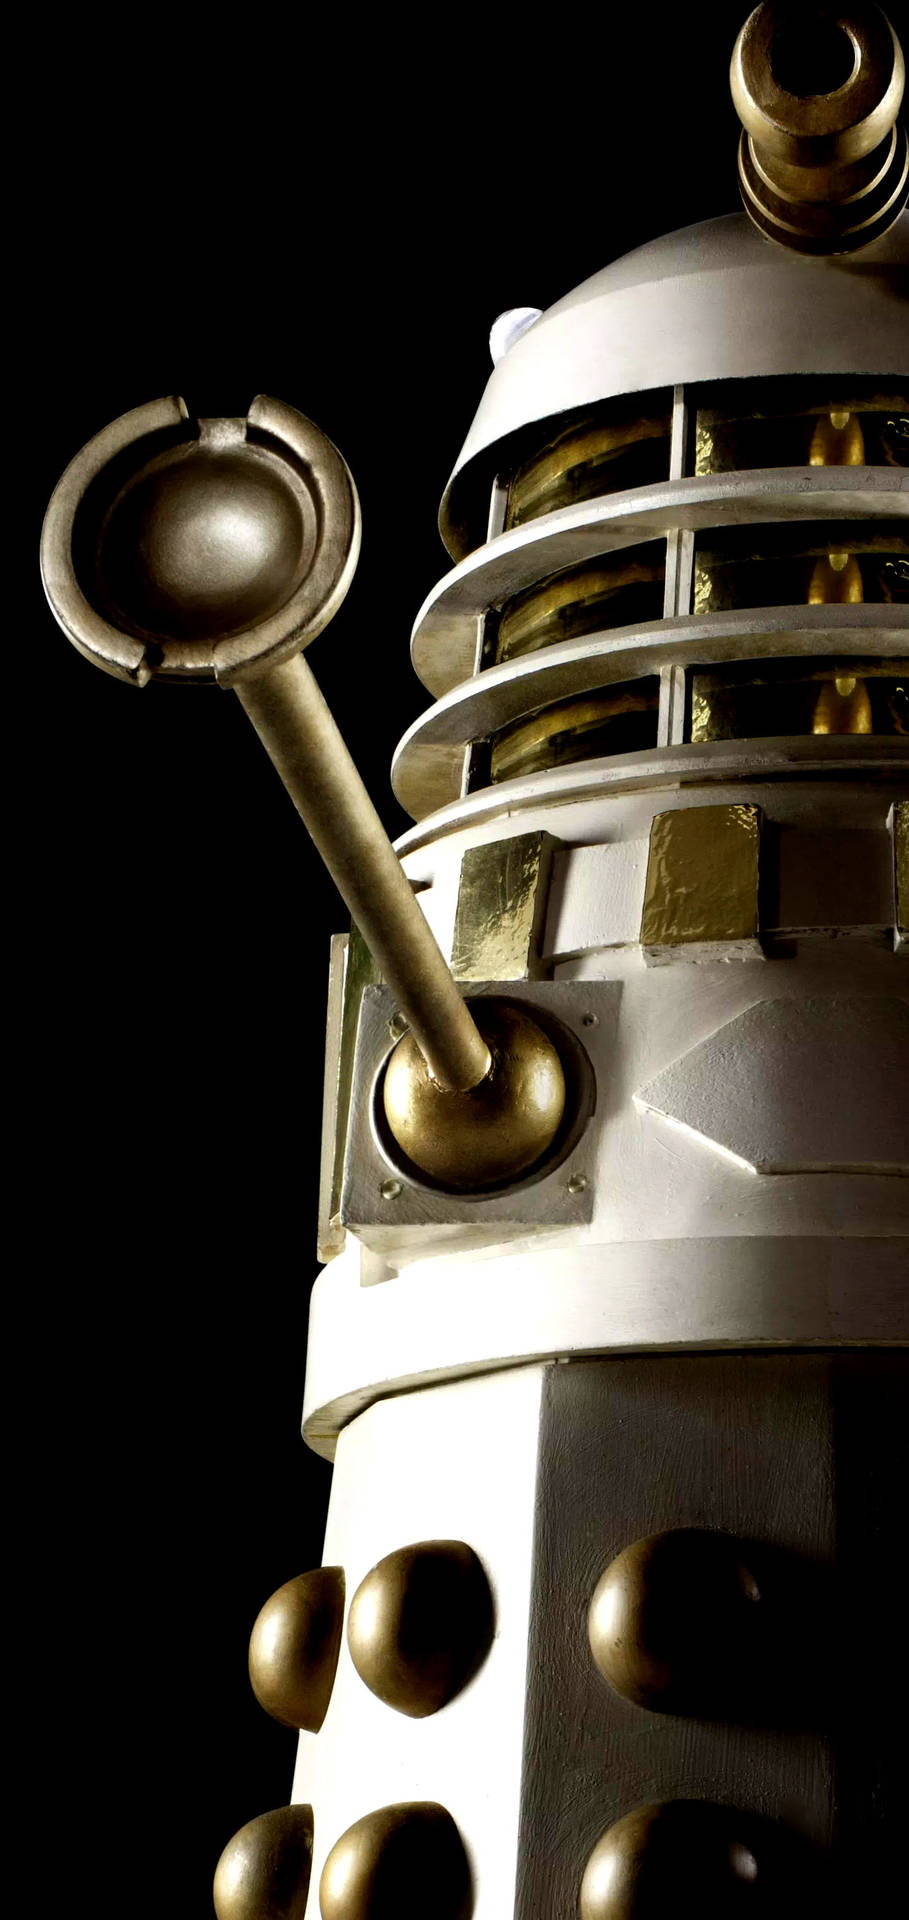 Caption: Samsung S10 With Dr. Who Dalek Clock Themed Wallpaper